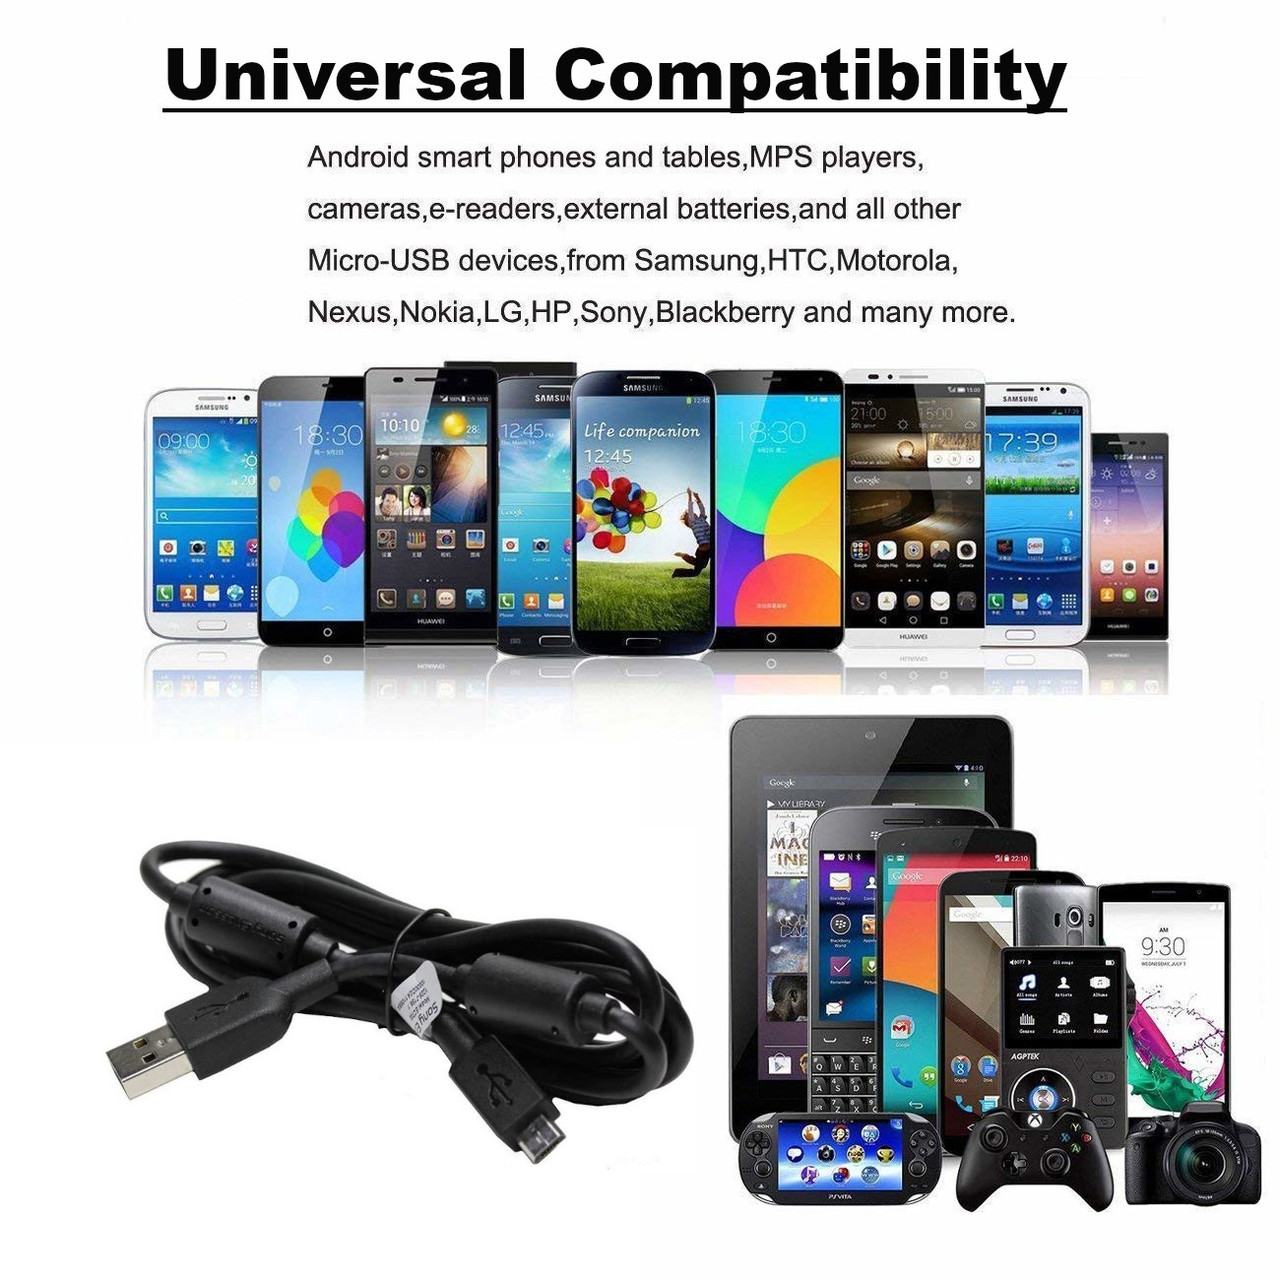 Premium Micro USB Adapter Cable Data Sync Power Supply Charger Cord For Sony PS4 Controller Playstation Xperia Mobile Phone Tablet